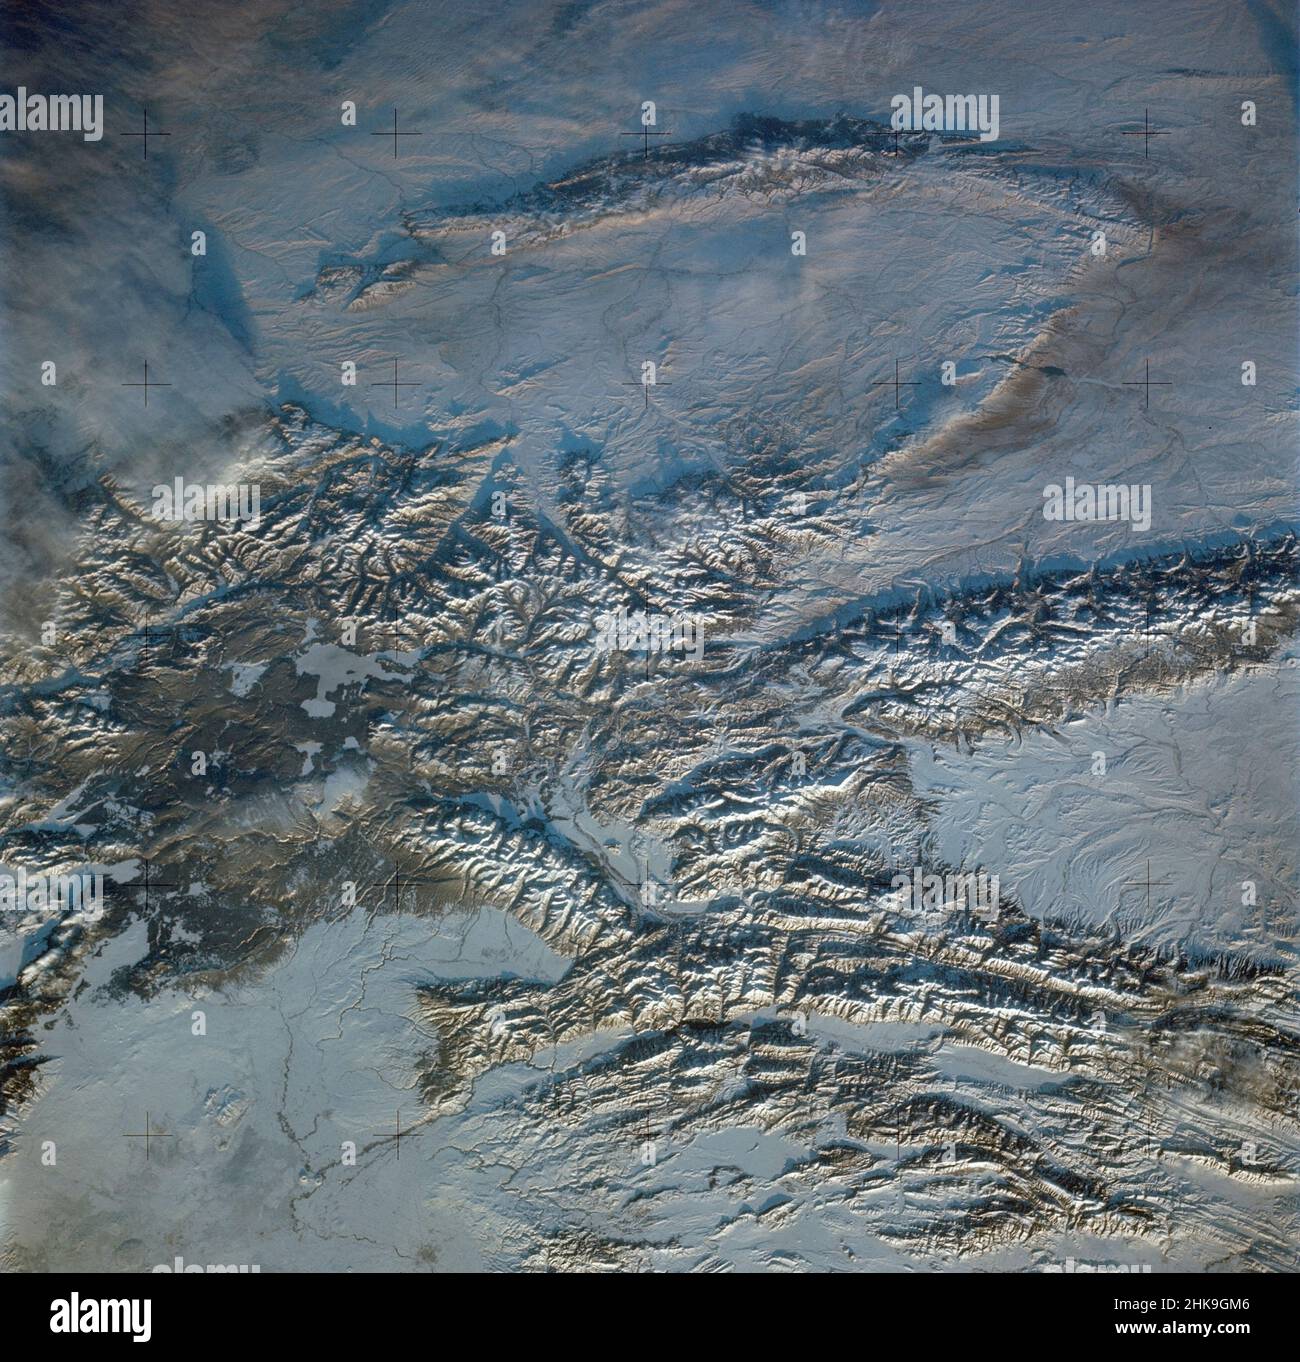 (February 1974) --- A near vertical view of the snow-covered northwest corner of Wyoming as seen from the Skylab space station in Earth orbit. A Skylab 4 crewman used a hand-held 70mm Hasselblad camera to take this picture. A small portion of Montana and Idaho is seen in this photograph also. The dark area is Yellowstone National Park. The largest body of water is Yellowstone Lake. The Absaroka Range is immediately east and northeast of Yellowstone Lake. The elongated range in the eastern part of the picture is the Big Horn Mountain range. The Wind River Range is at bottom center. The Grand Te Stock Photo